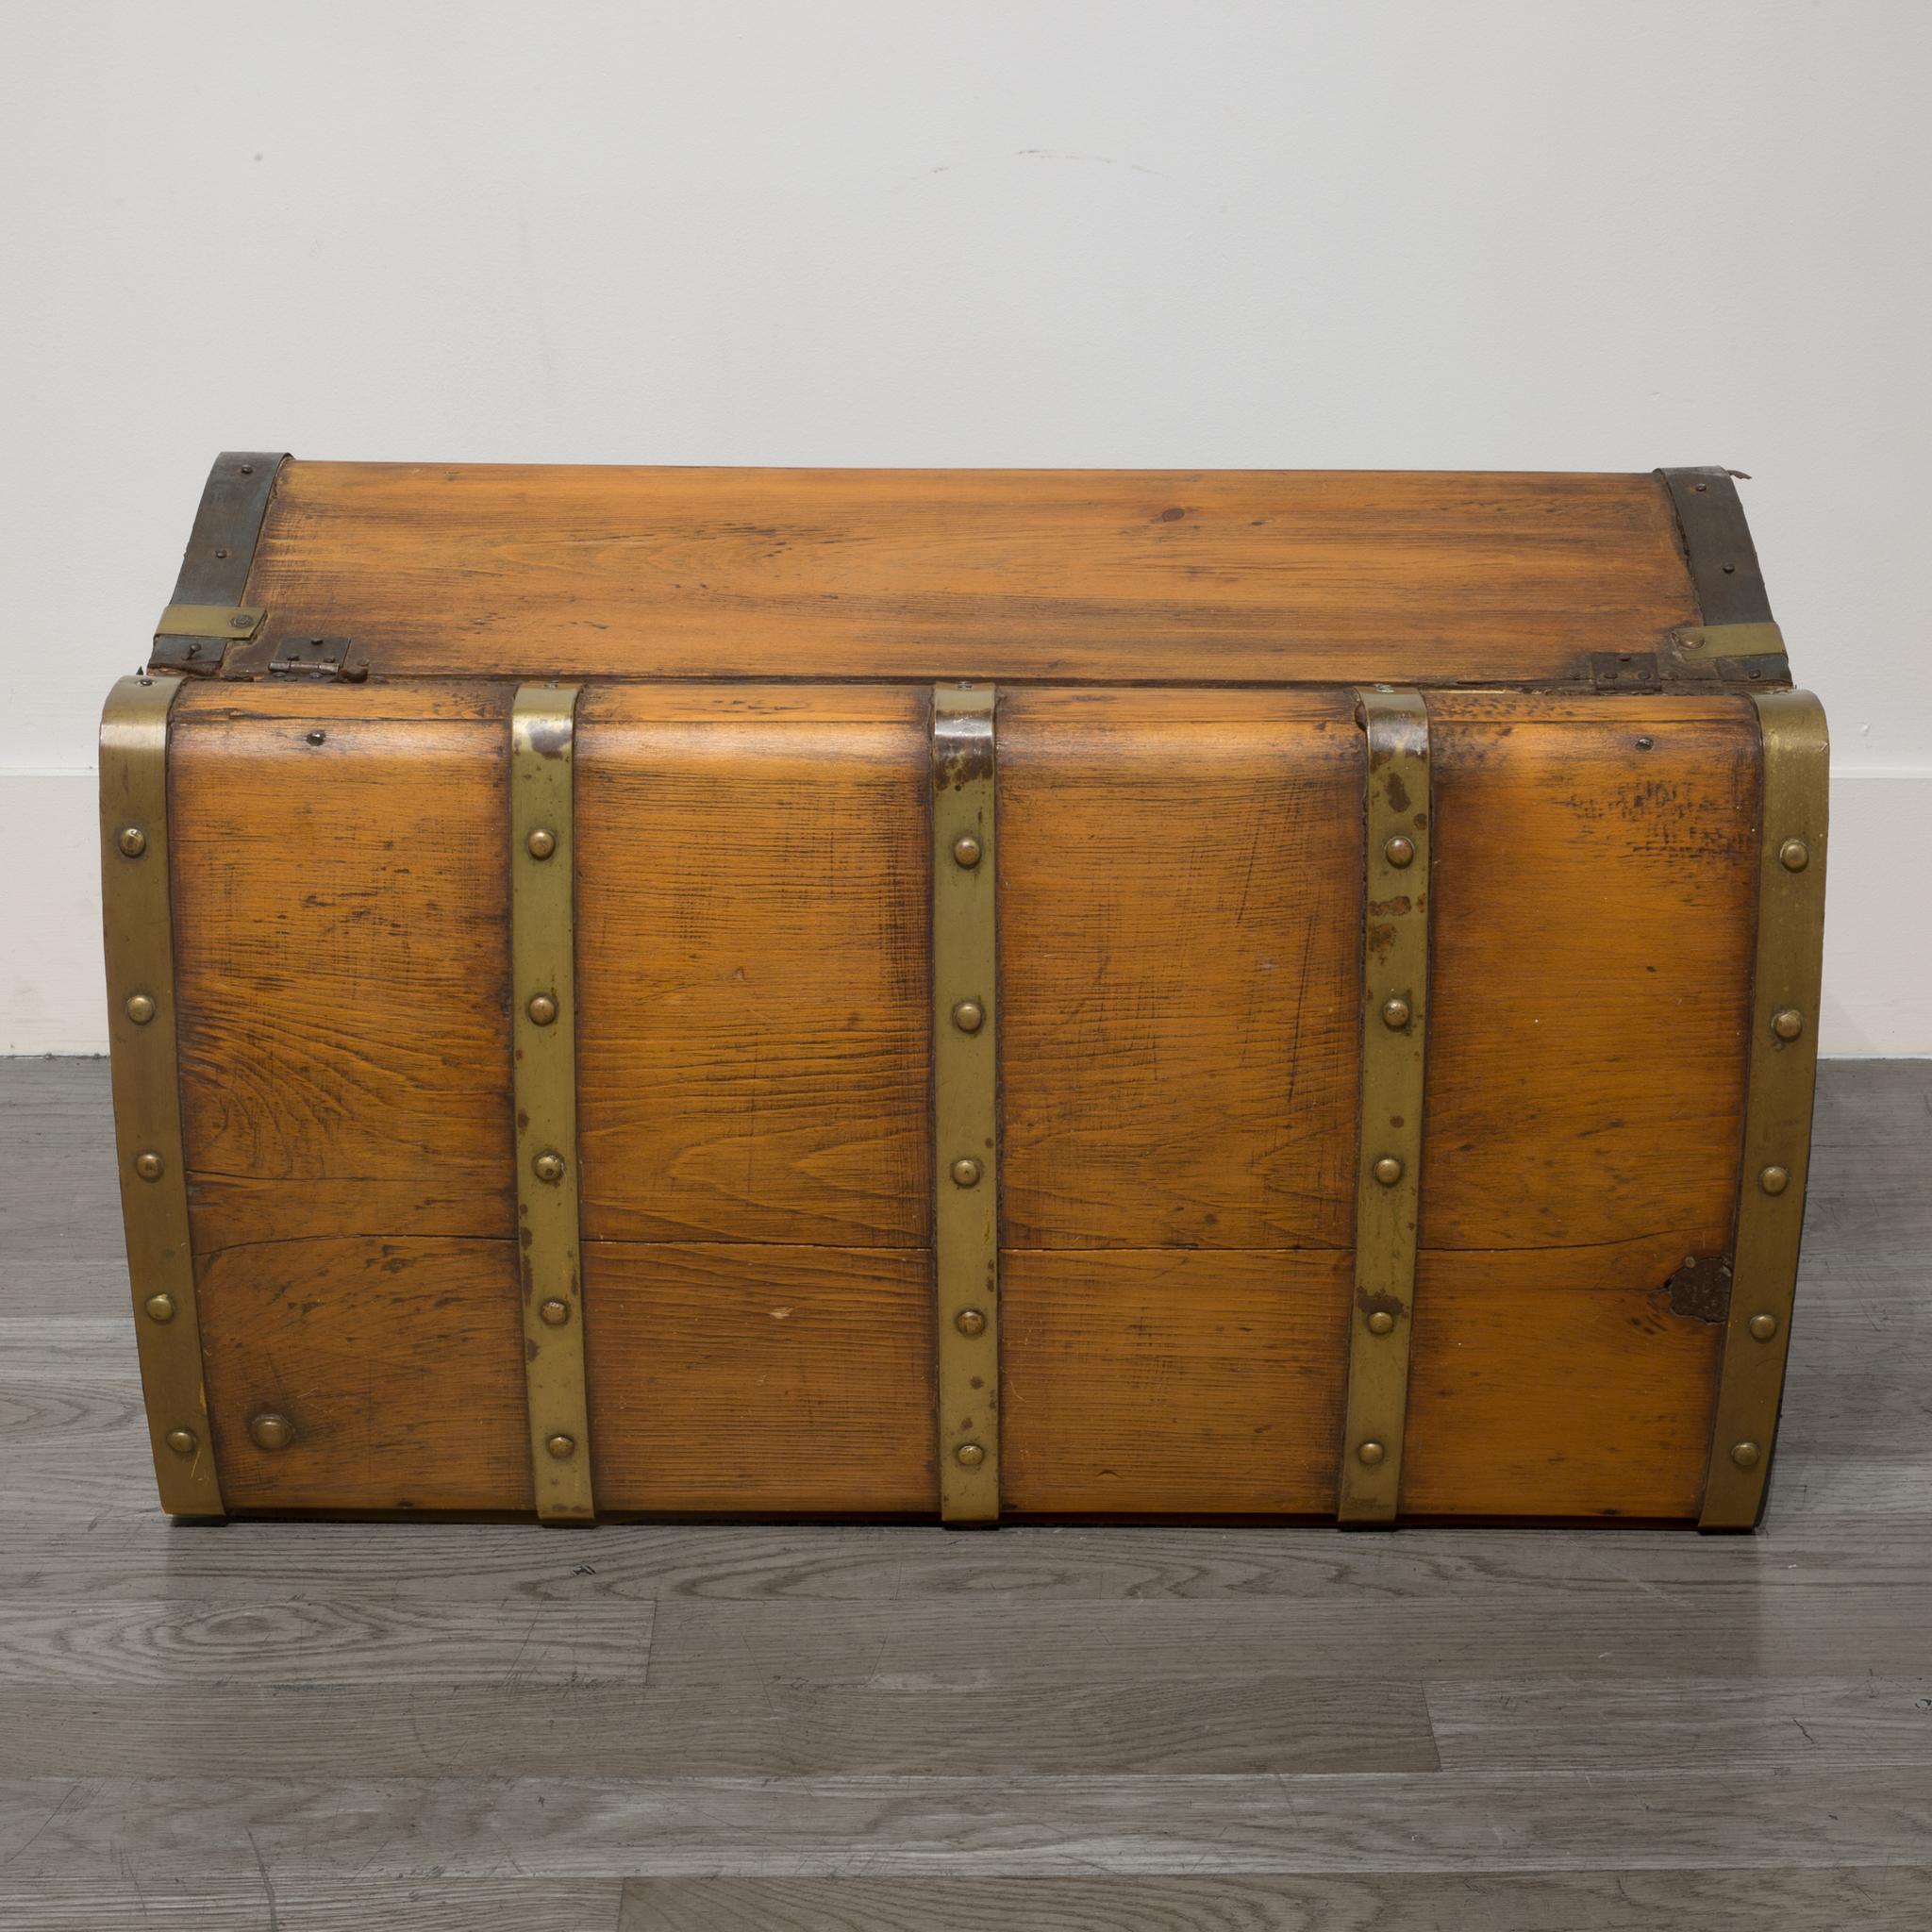 Industrial 19th Century Jenny Lind Wood and Brass Dome Stagecoach Trunk, circa 1850-1860